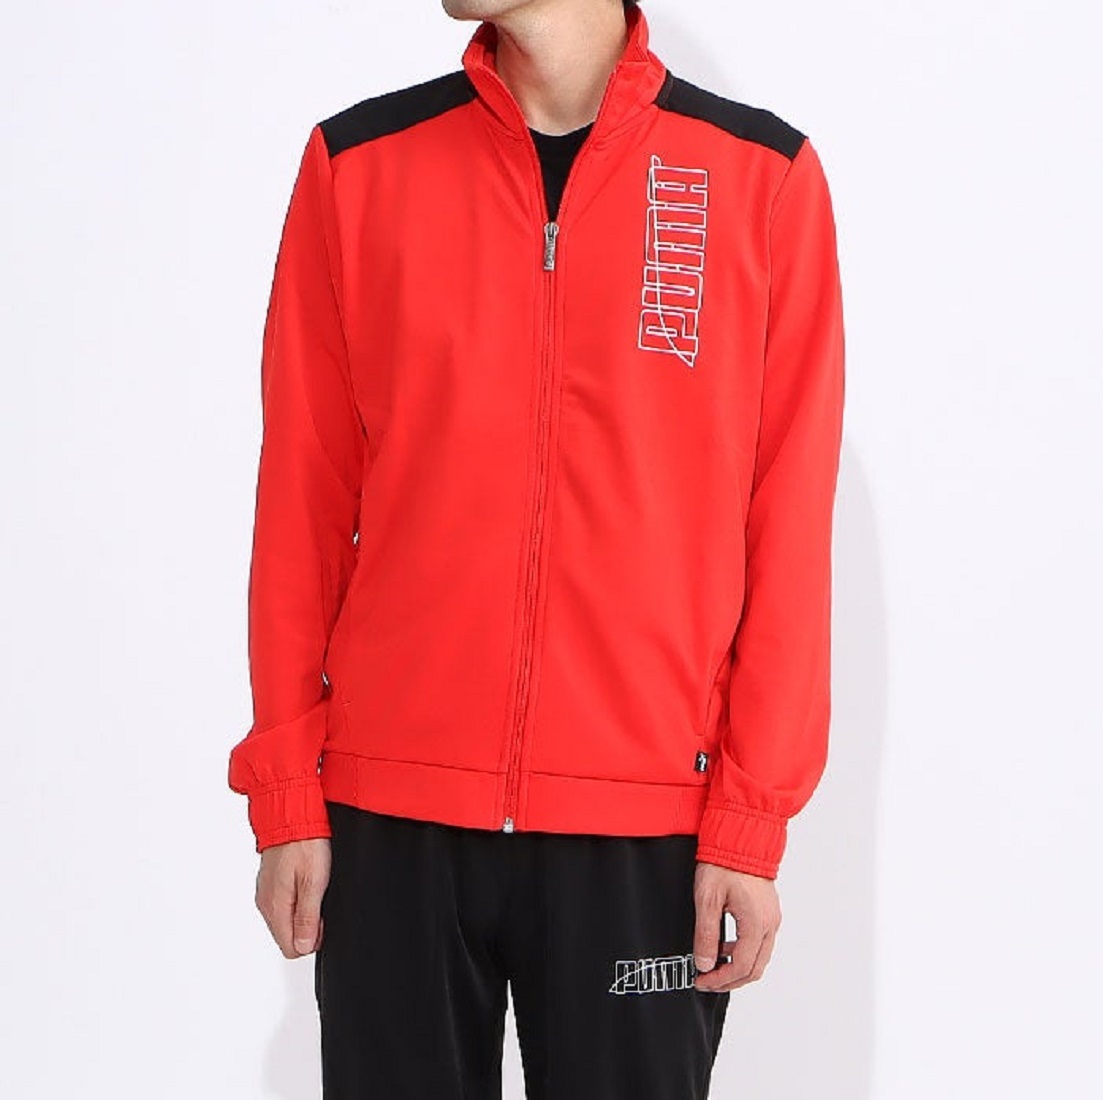  Puma graphic tricot to Lux -tsuL size red / black GRAPHIC stand-up collar jacket & pants jersey top and bottom set 